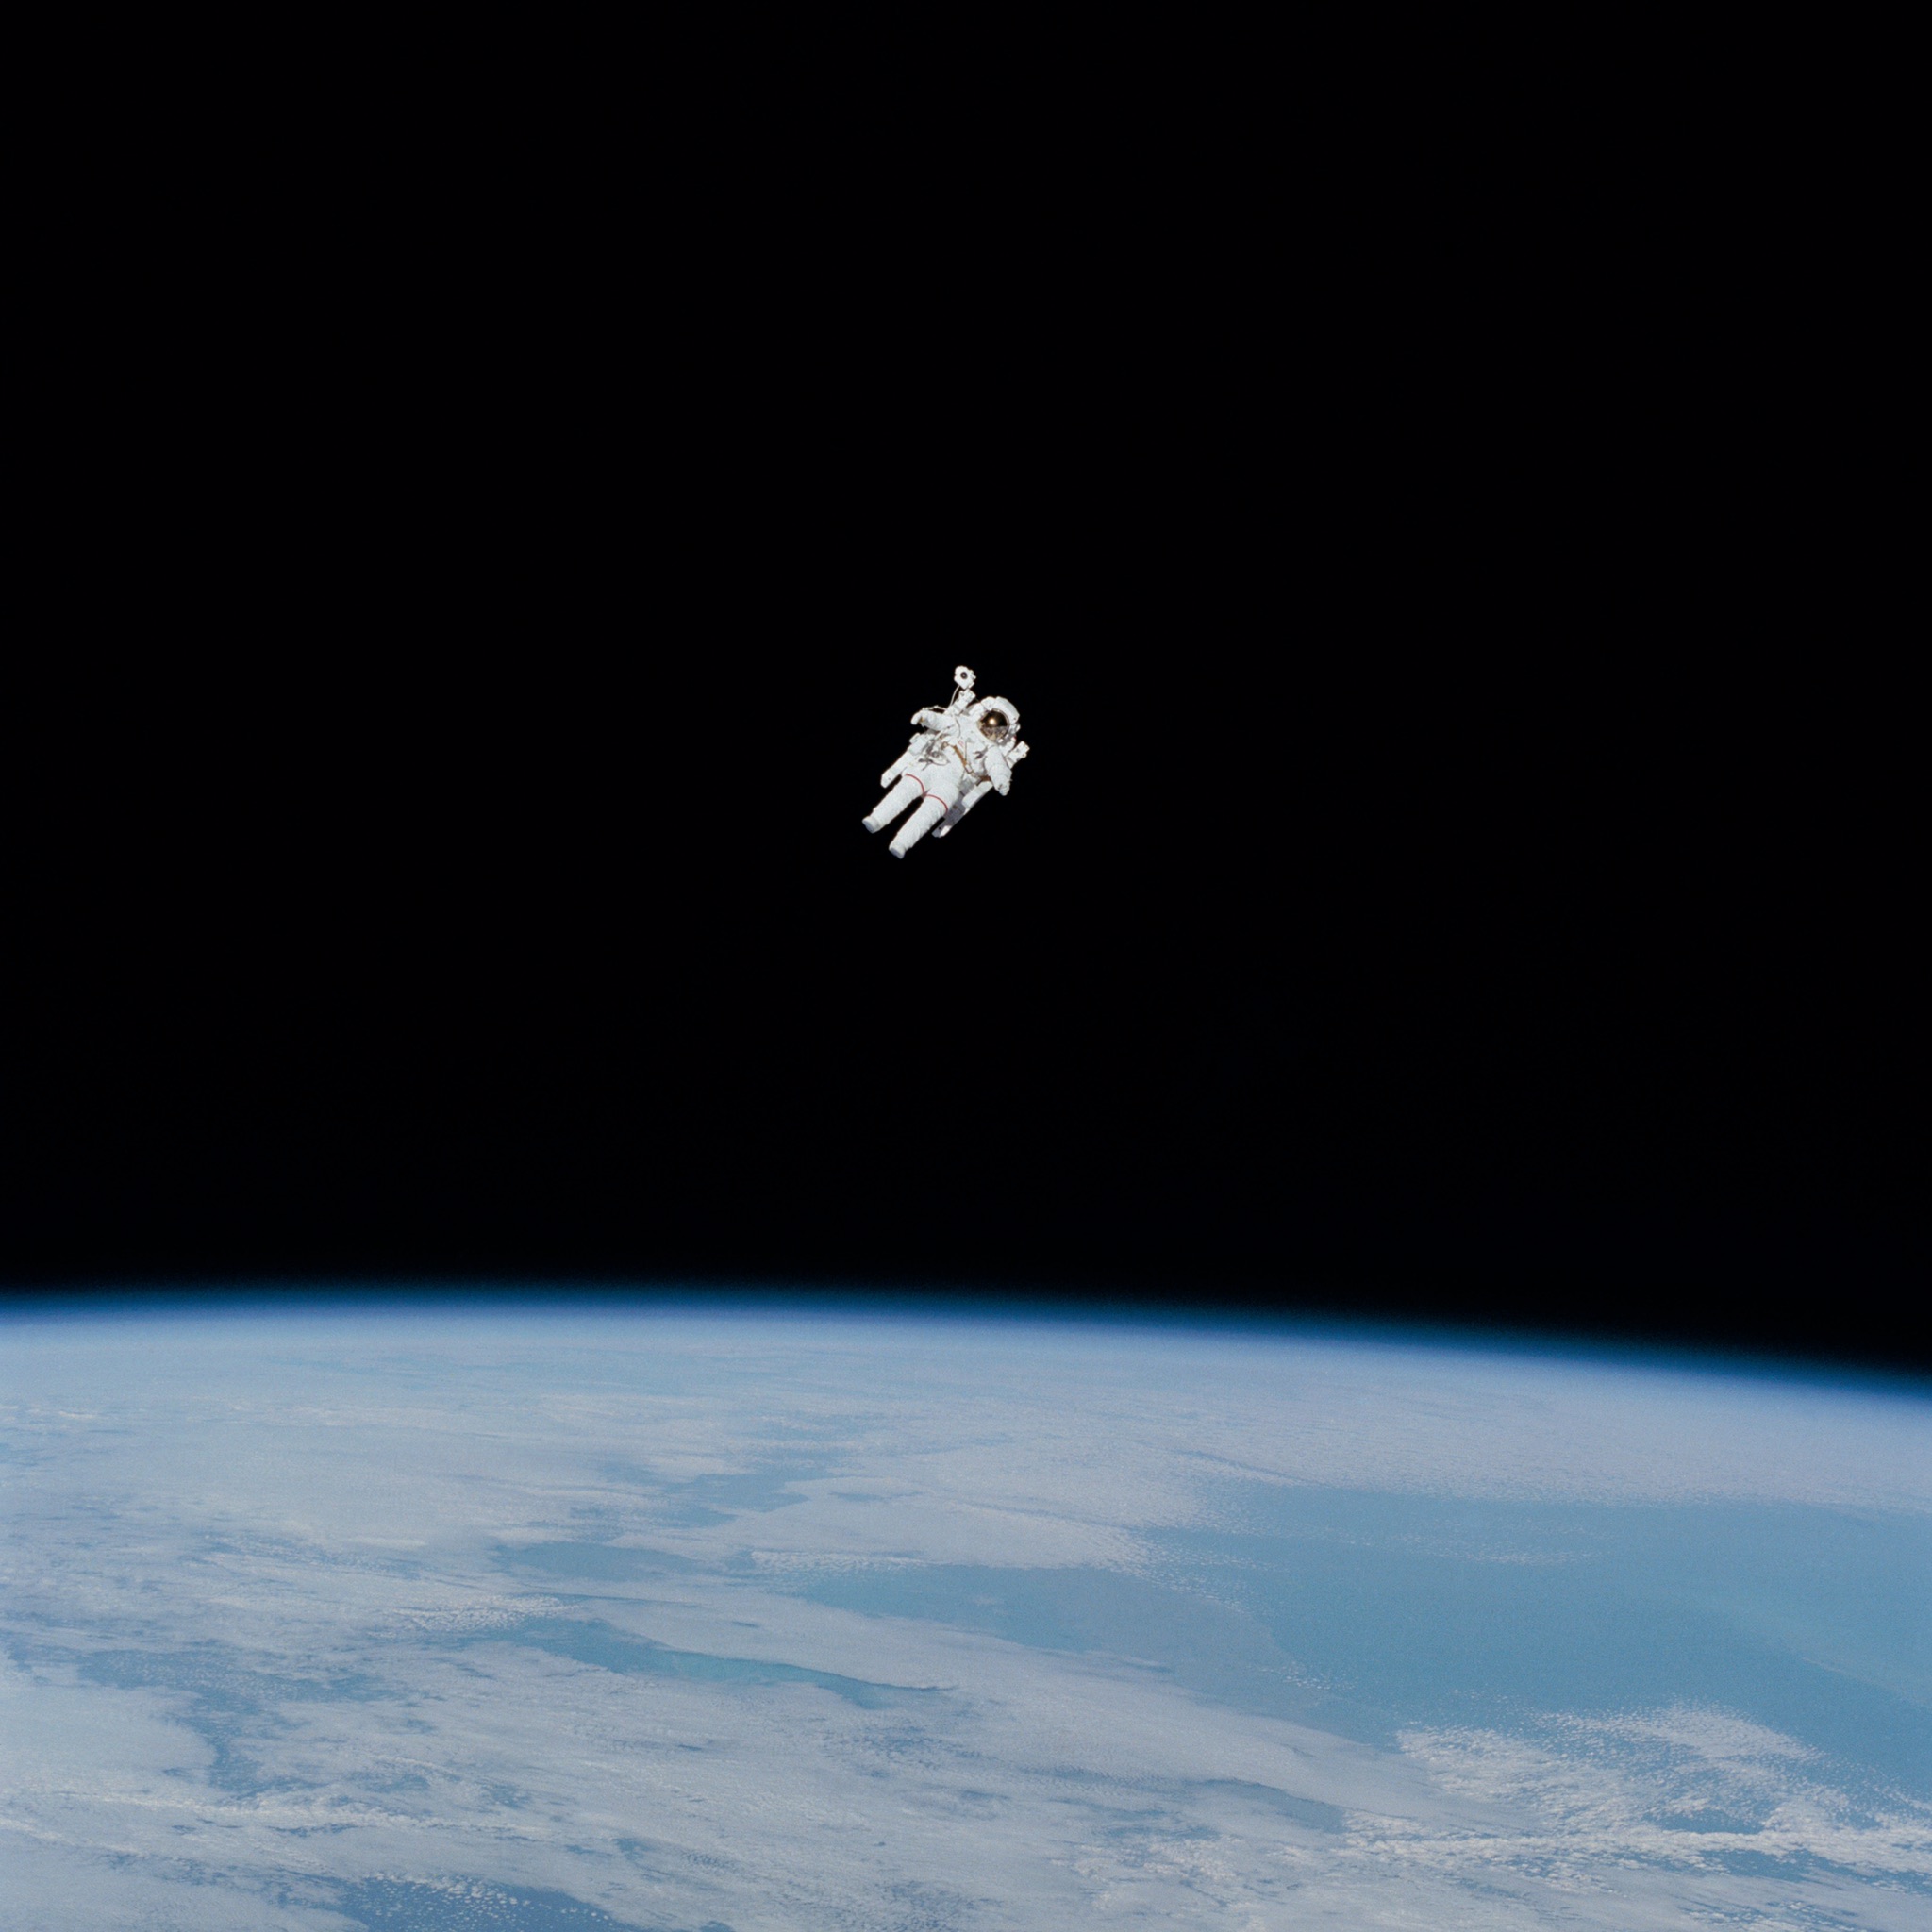 An astronaut floats in the vast darkness of space.